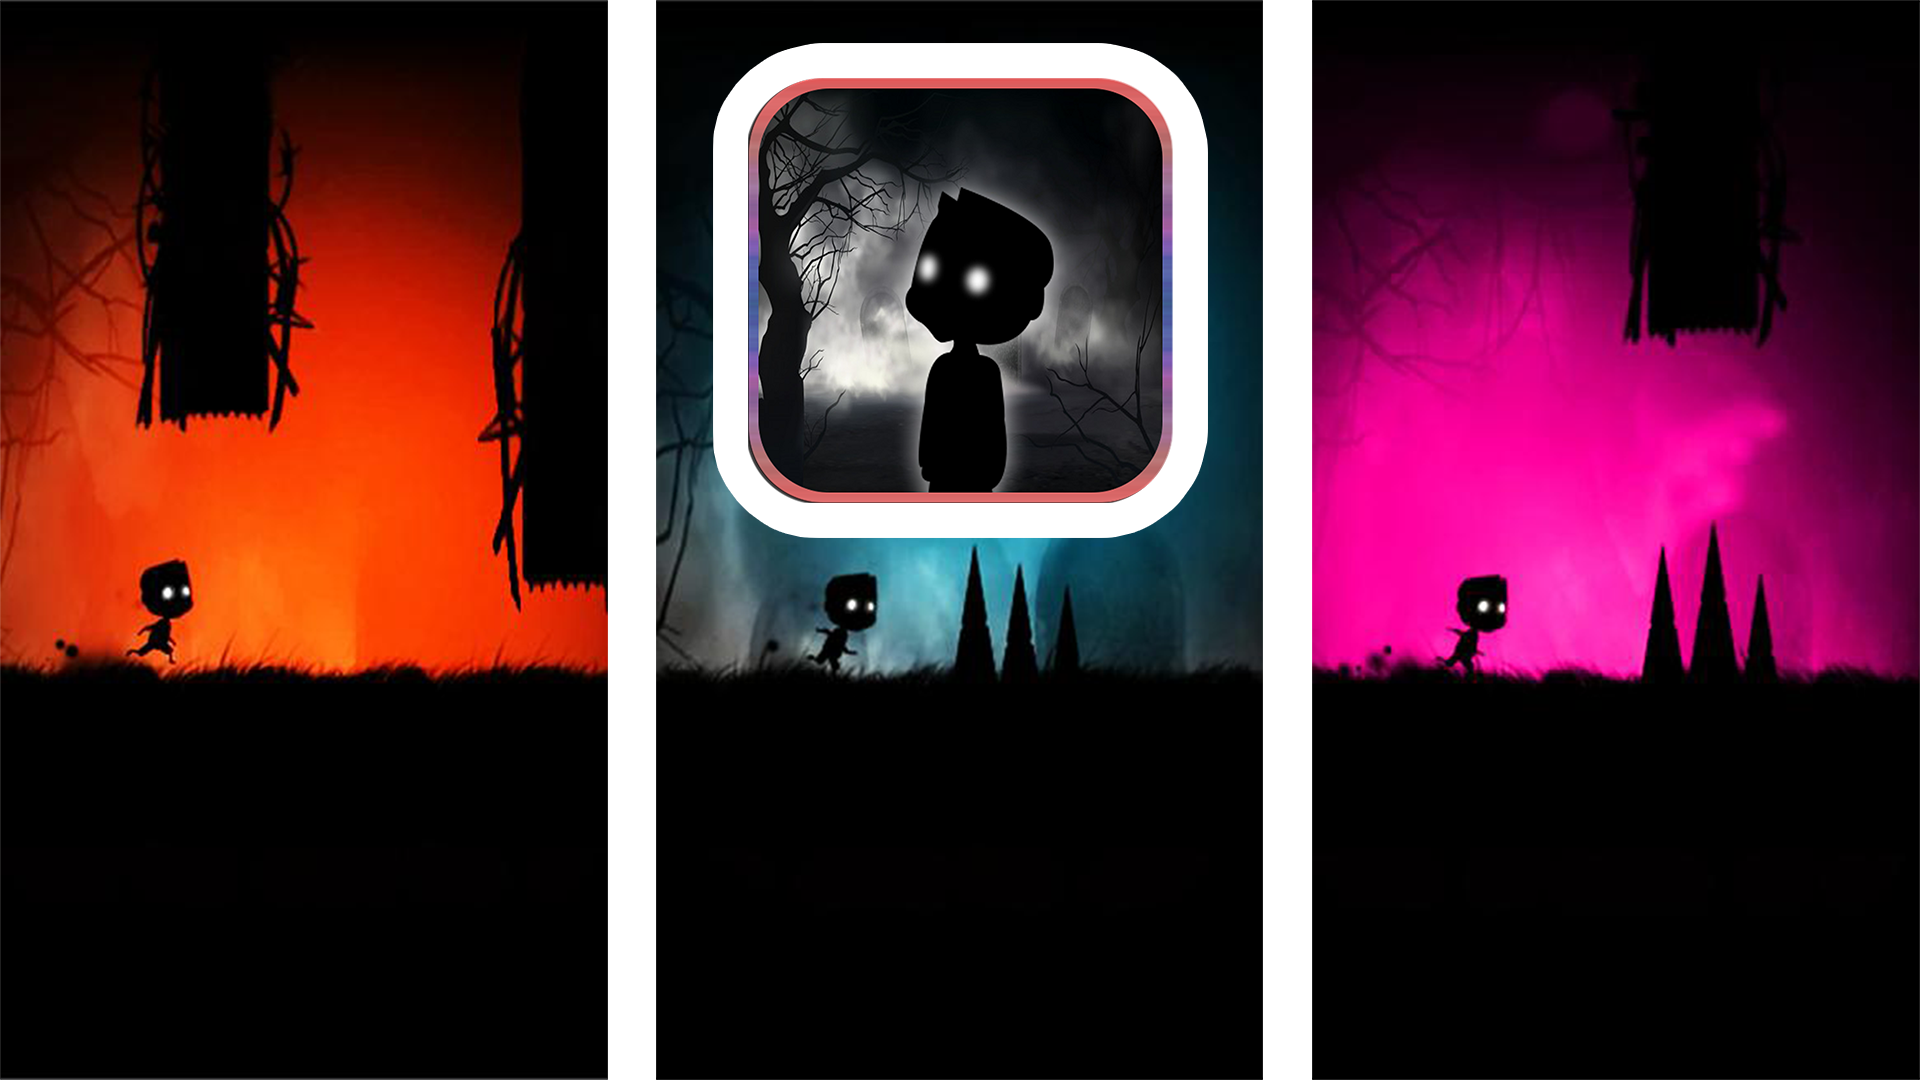 Little Nightmare 2 Piano Tiles Game - Play UNBLOCKED Little